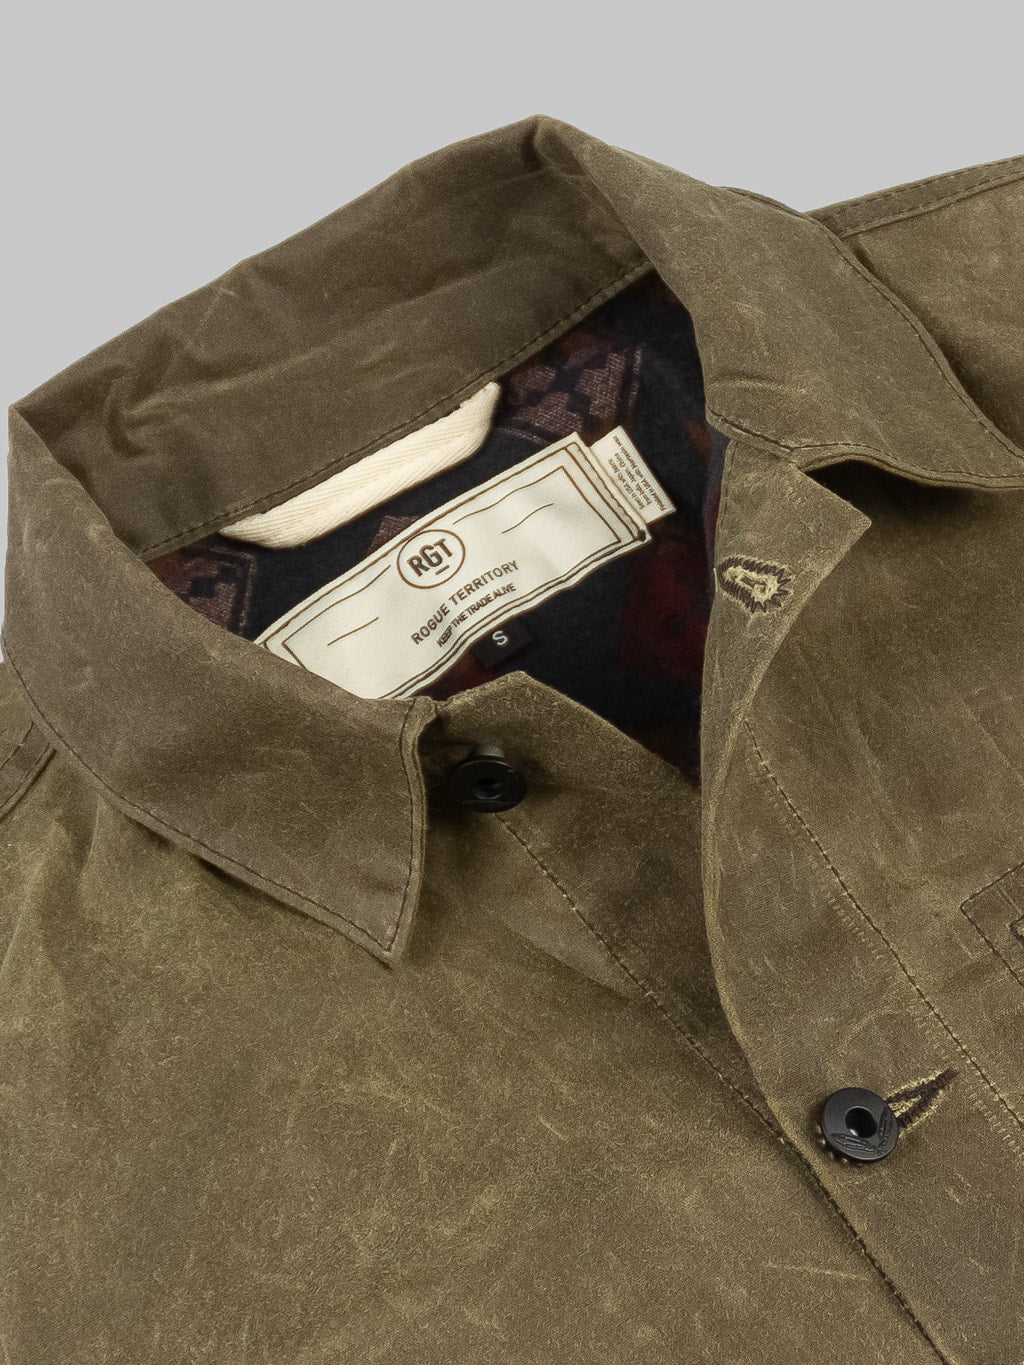 Rogue Territory Supply Jacket Lined Brown Ridgeline collar